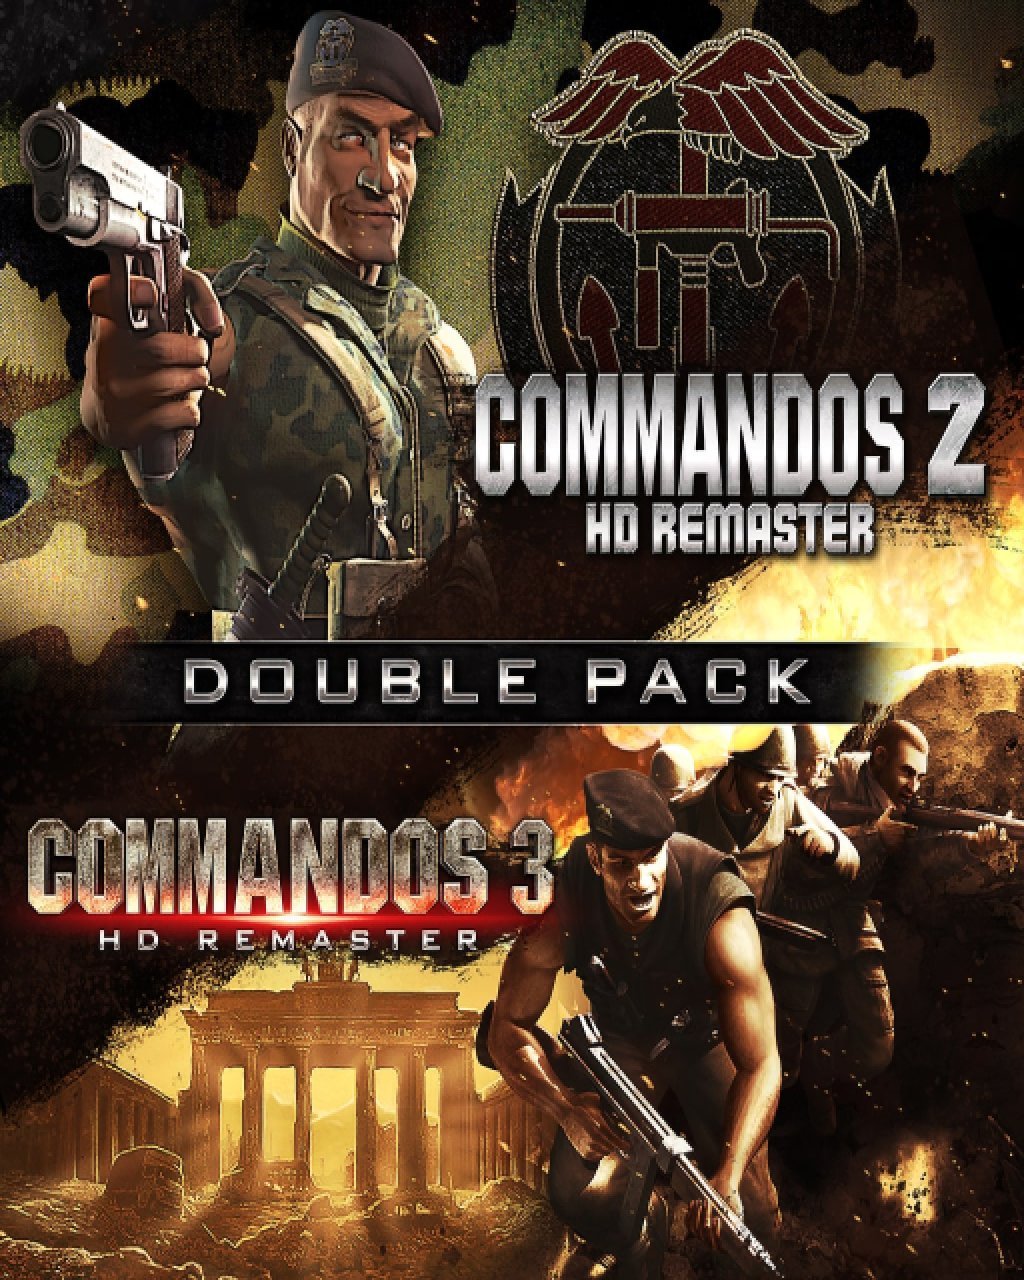 Commandos 2 3 - HD Remaster Double Pack (DIGITAL)